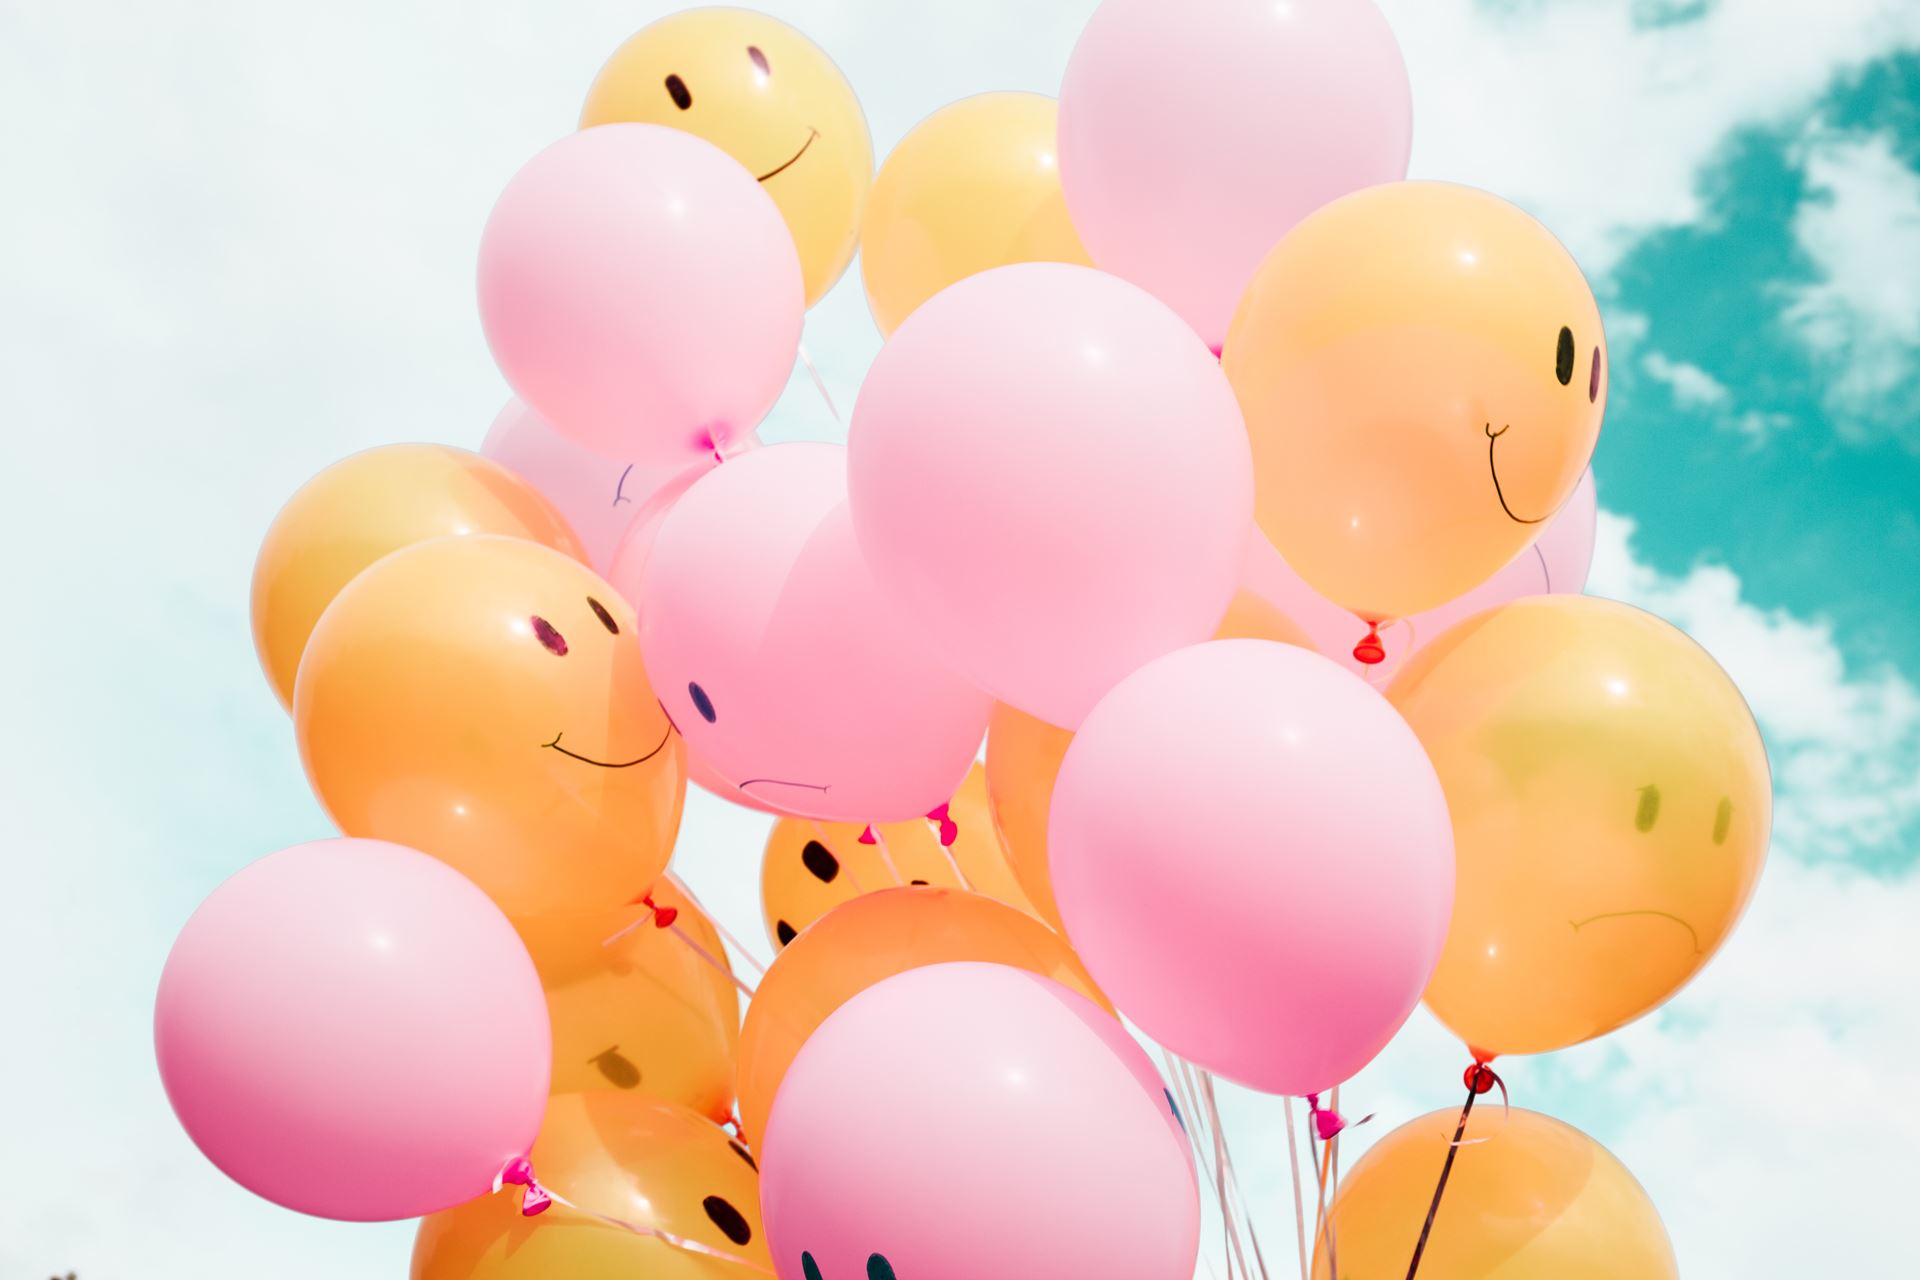 Pink and orange balloons, some of which have smiley faces